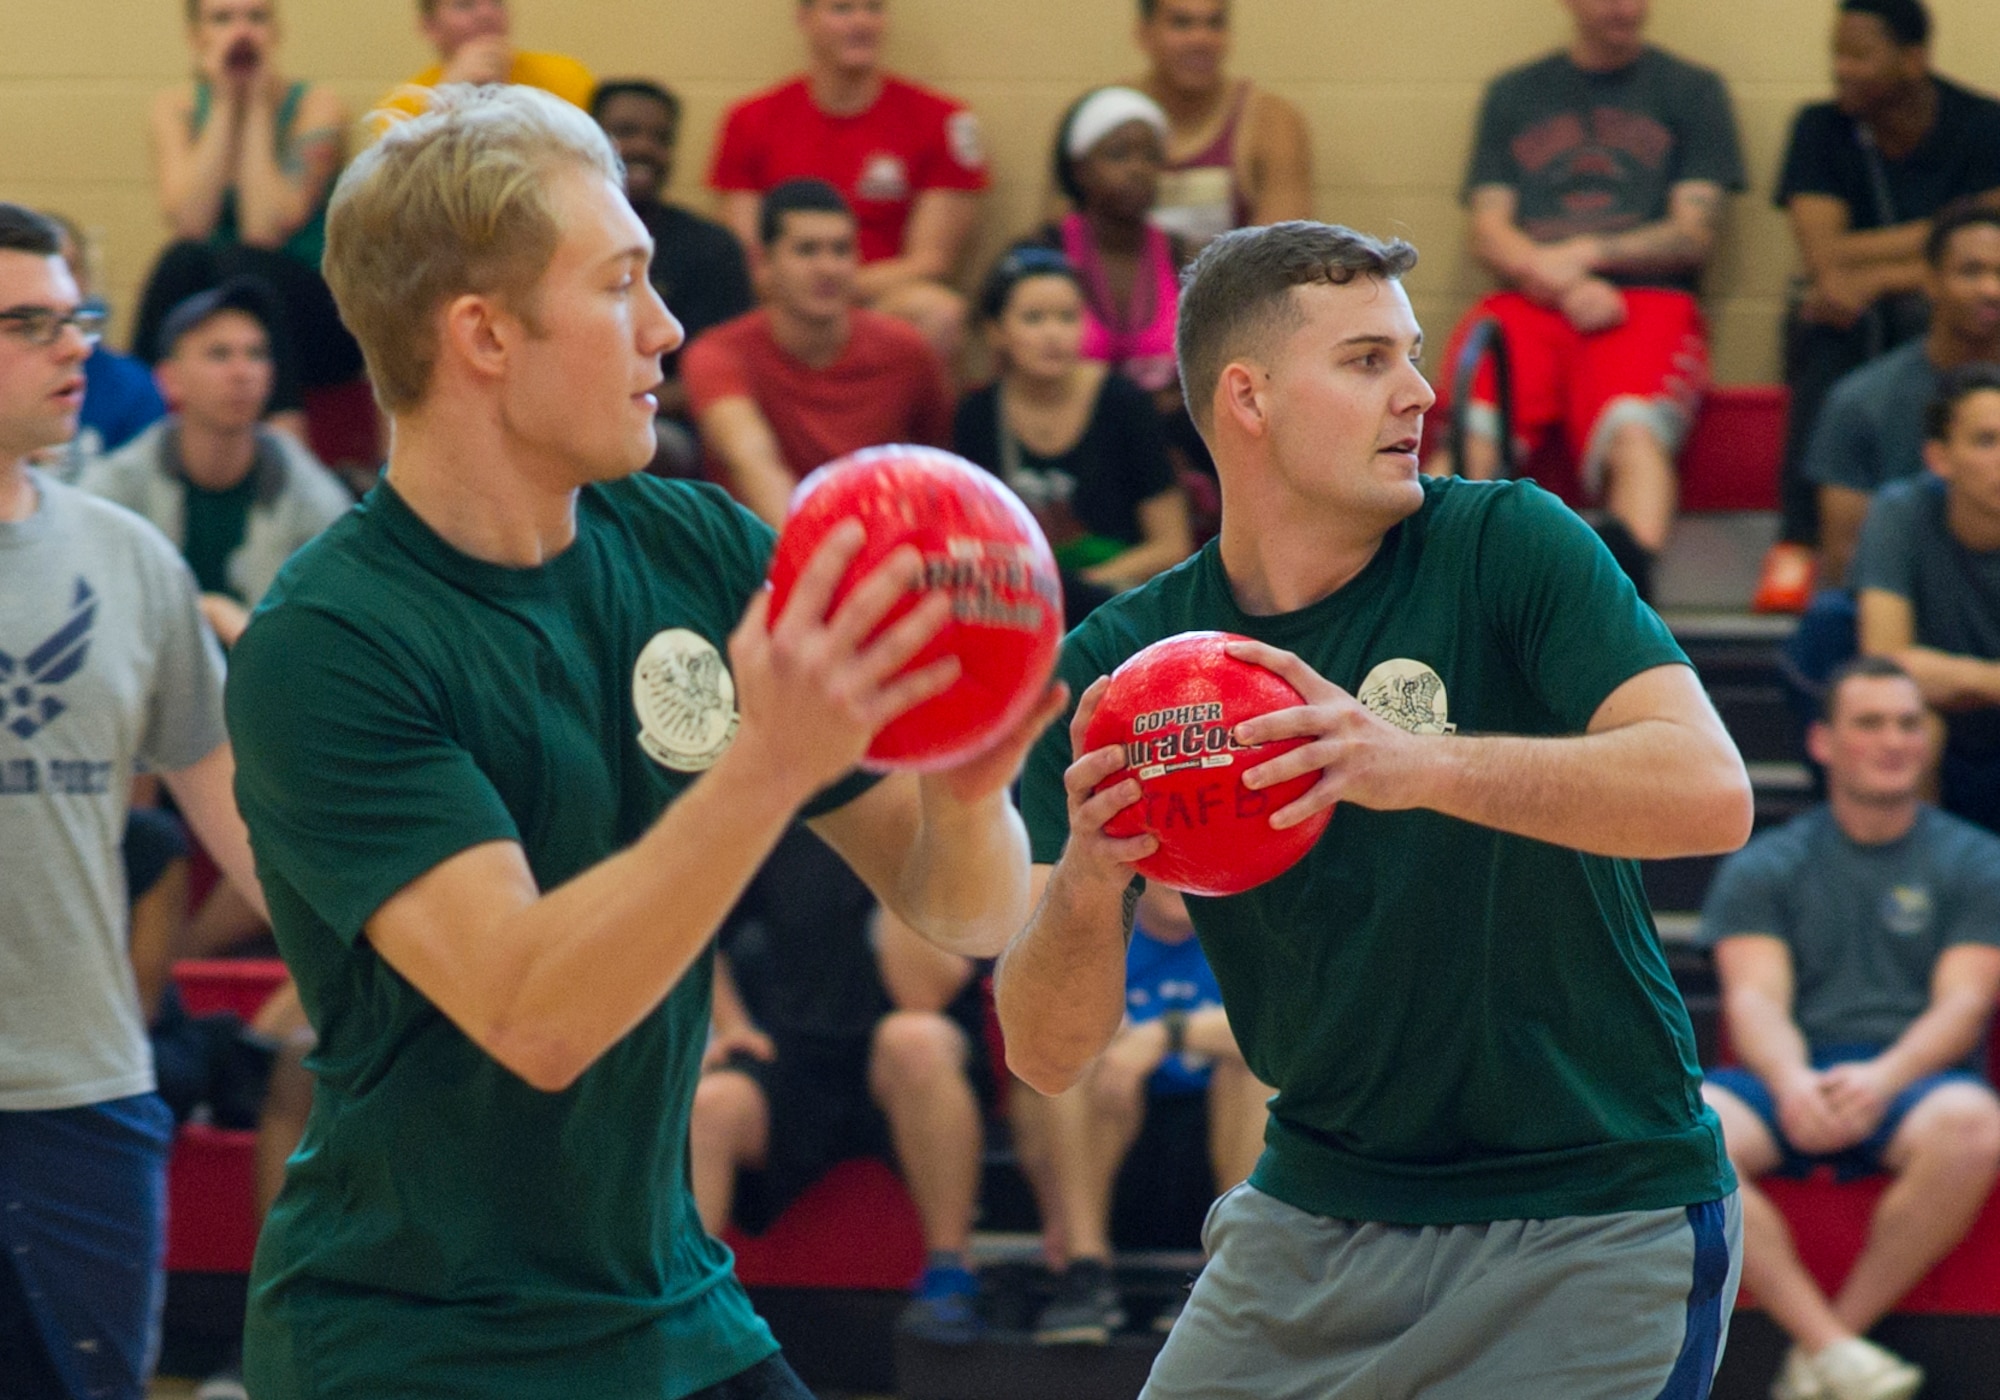 Airman 1st Class Tyler Busick (left) and Senior Airman Yaal Kand (right), 325th Contracting Squadron contracting specialists, play dodgeball during Comprehensive Airman Fitness Day April 1, at the Tyndall Fitness Center. (U.S. Air Force photo by Senior Airman Alex Fox Echols III/Released)